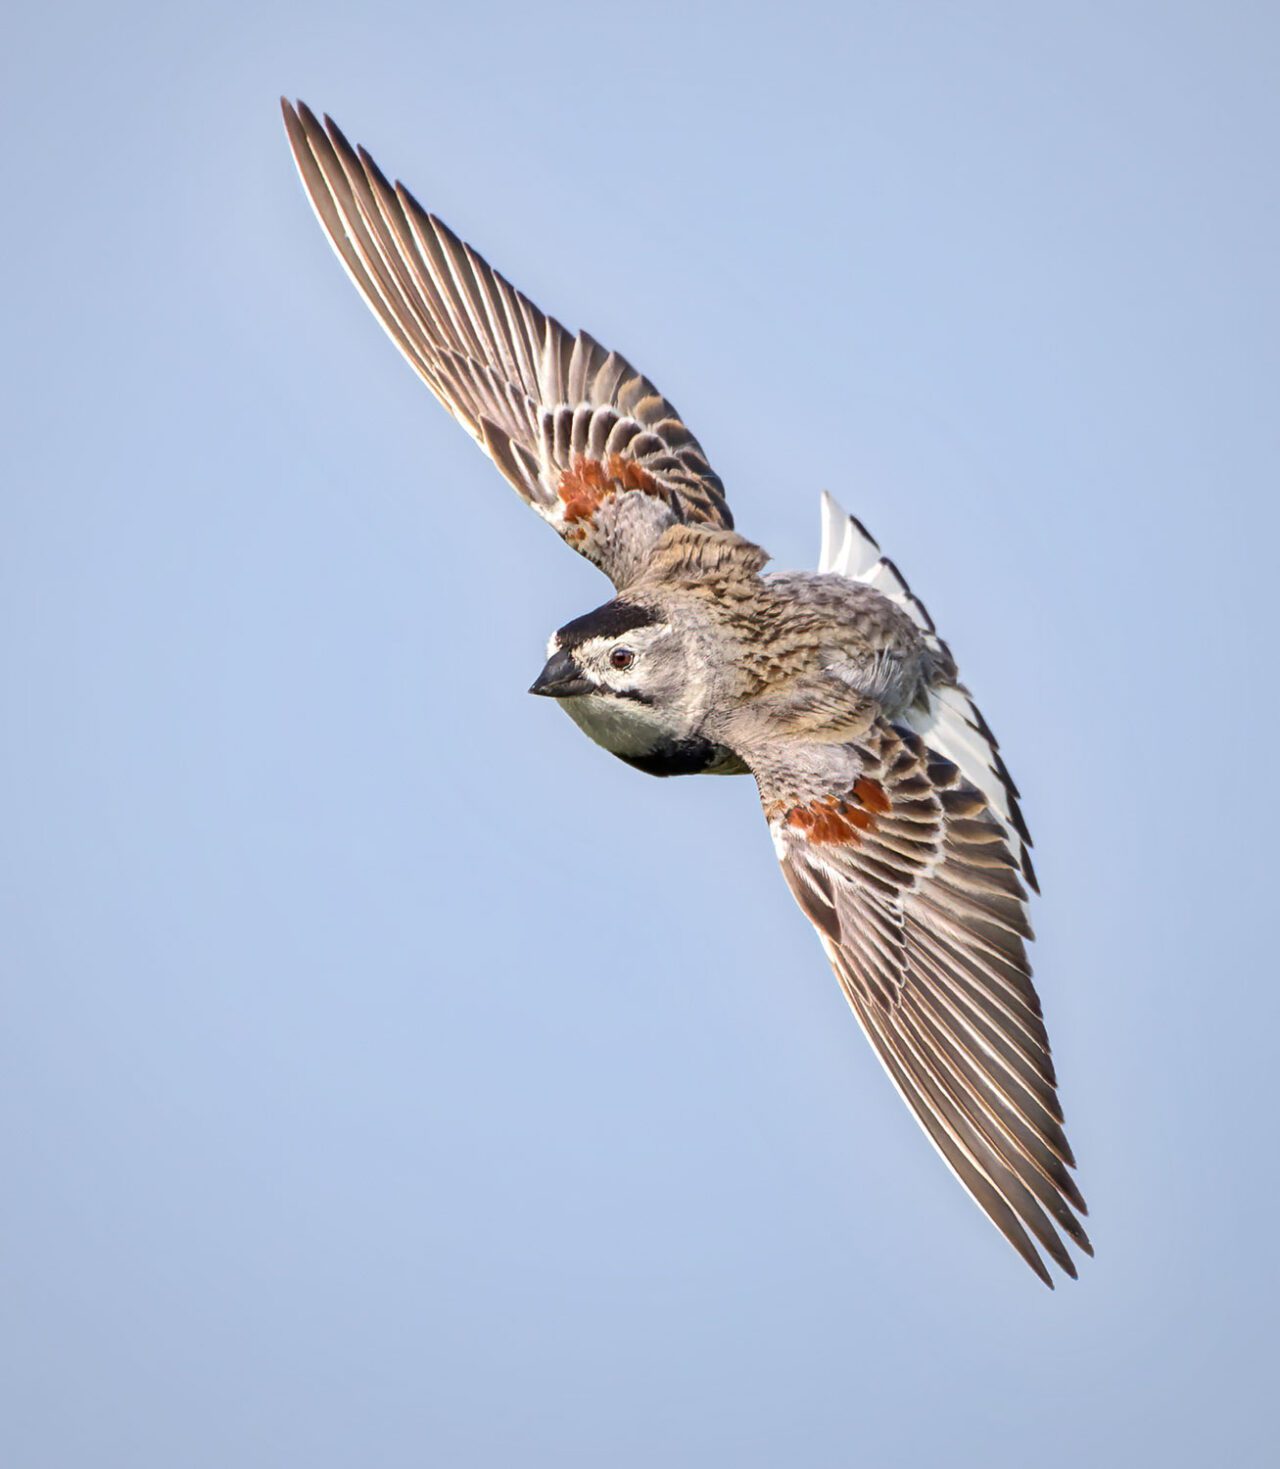 A brown and beige bird with reddish wing patches and black facial marks and a black, conical bill, flying.